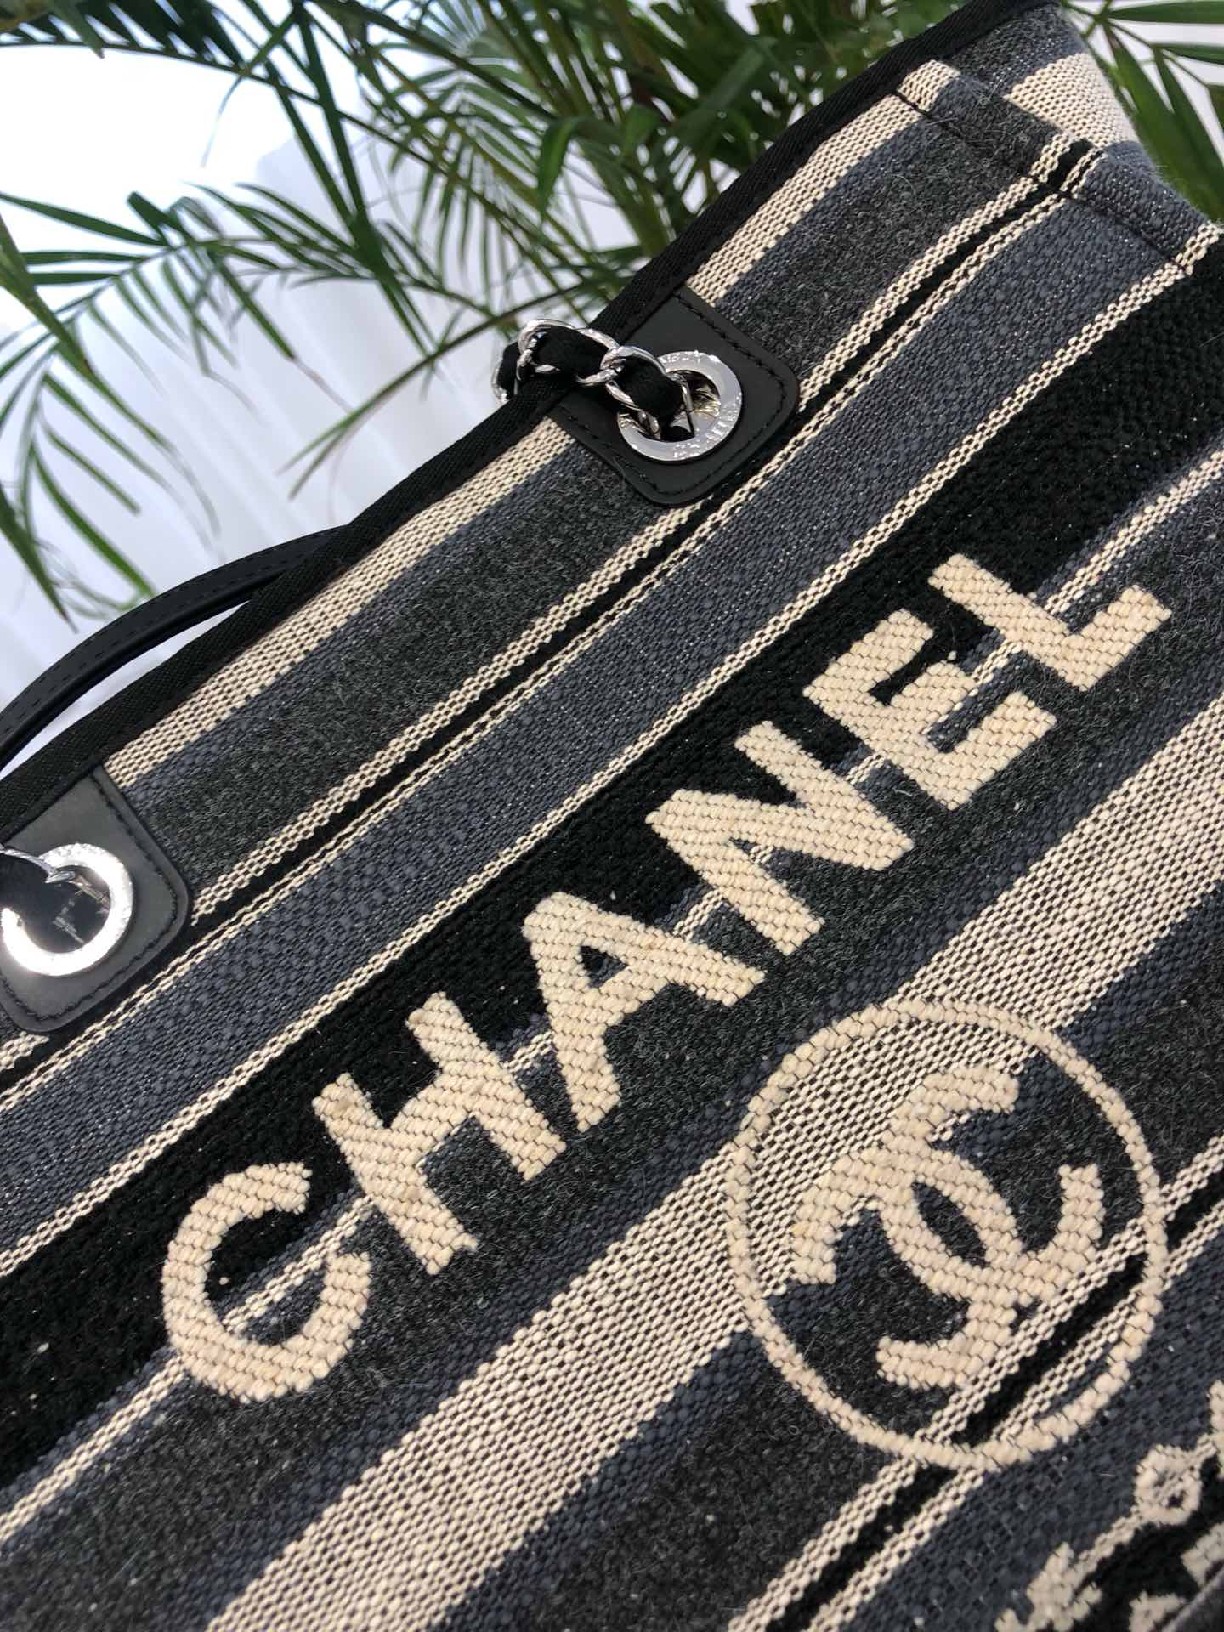 best quality original Chanel canvas tote shopping bags 30492 - Click Image to Close